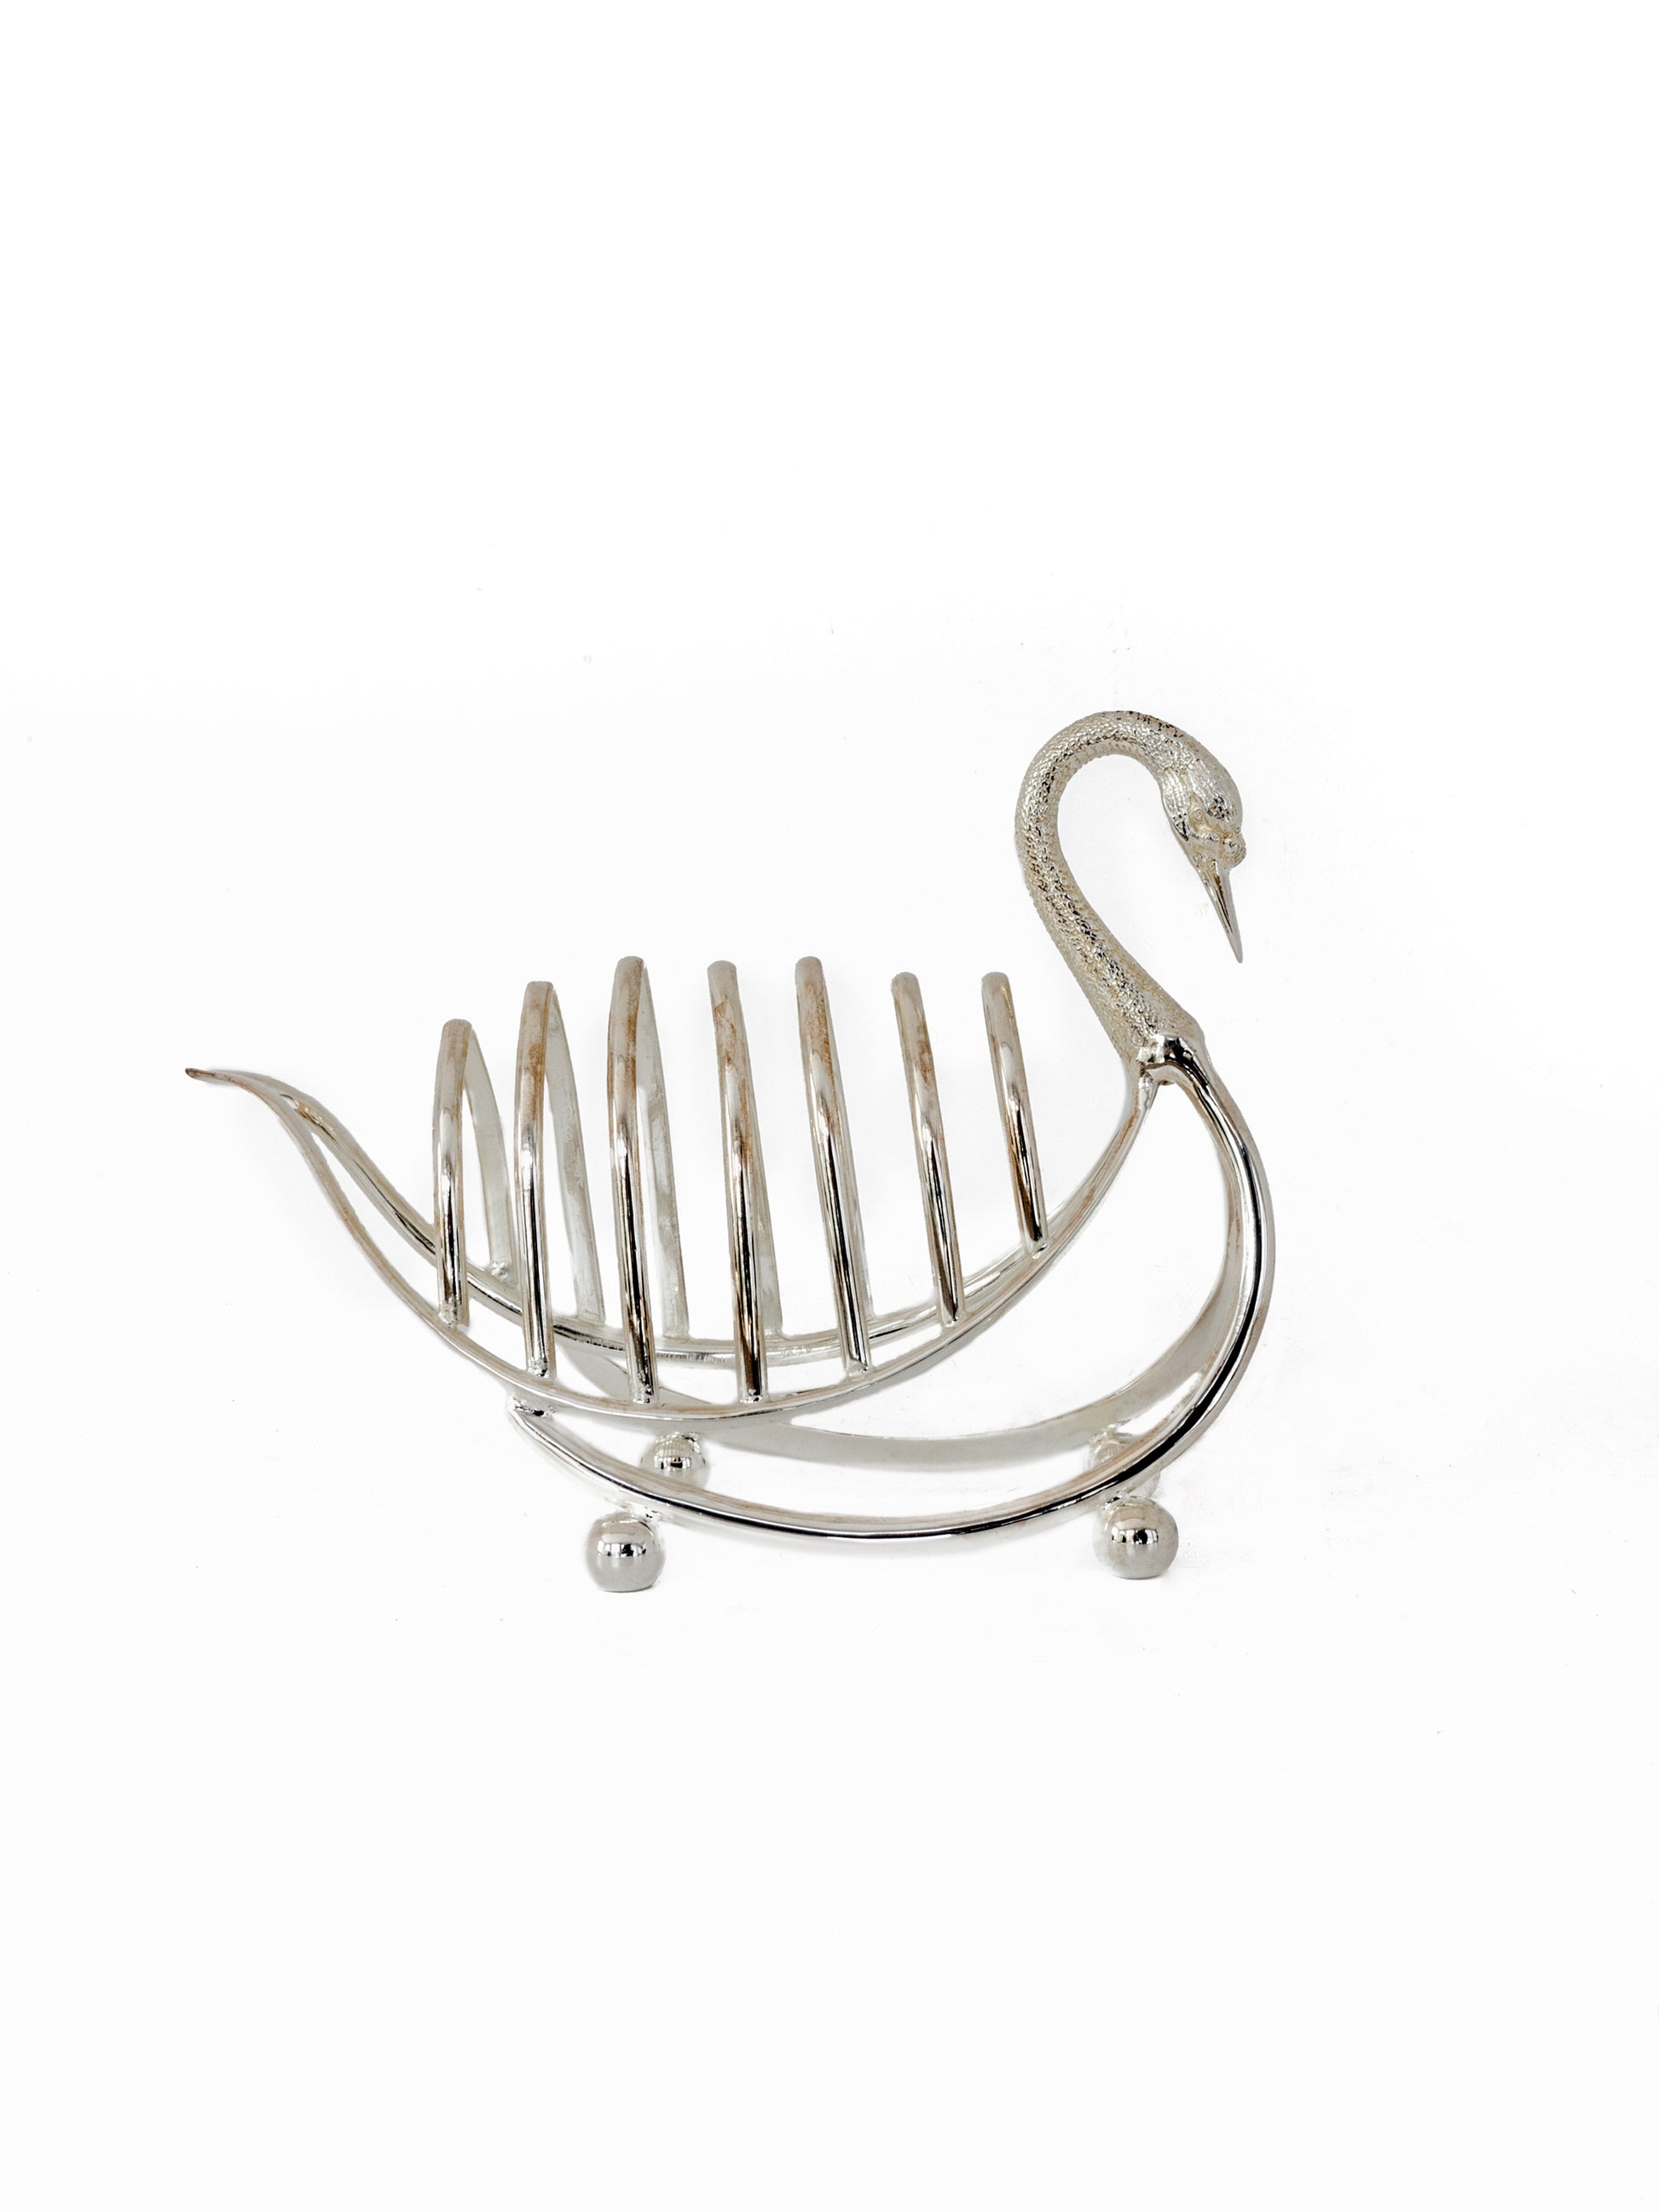 https://westontable.com/cdn/shop/products/19th-Century-Henry-Wilkinson-Silver-Plated-Swan-Toast-Rack-Weston-Table-.SPjpg_2aba7ea6-d2ae-4f89-82f4-74c30be45405.jpg?v=1612445336&width=1946